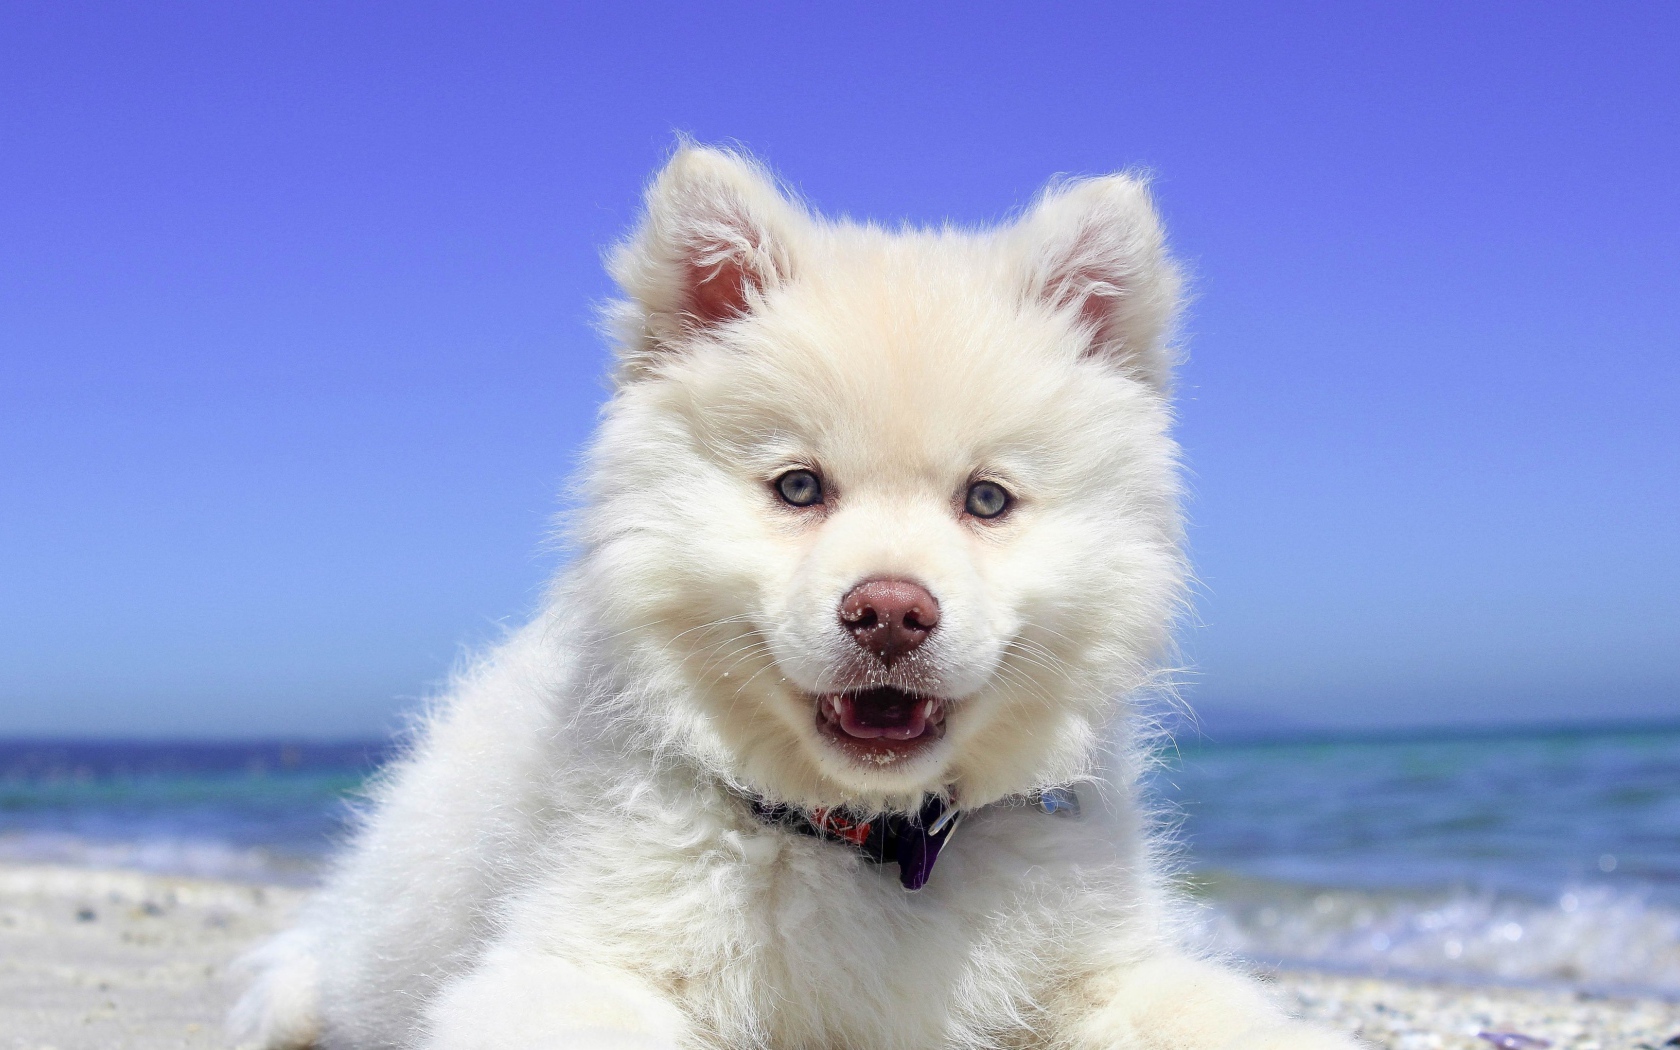 White fluffy puppy with a pink nose on the beach 